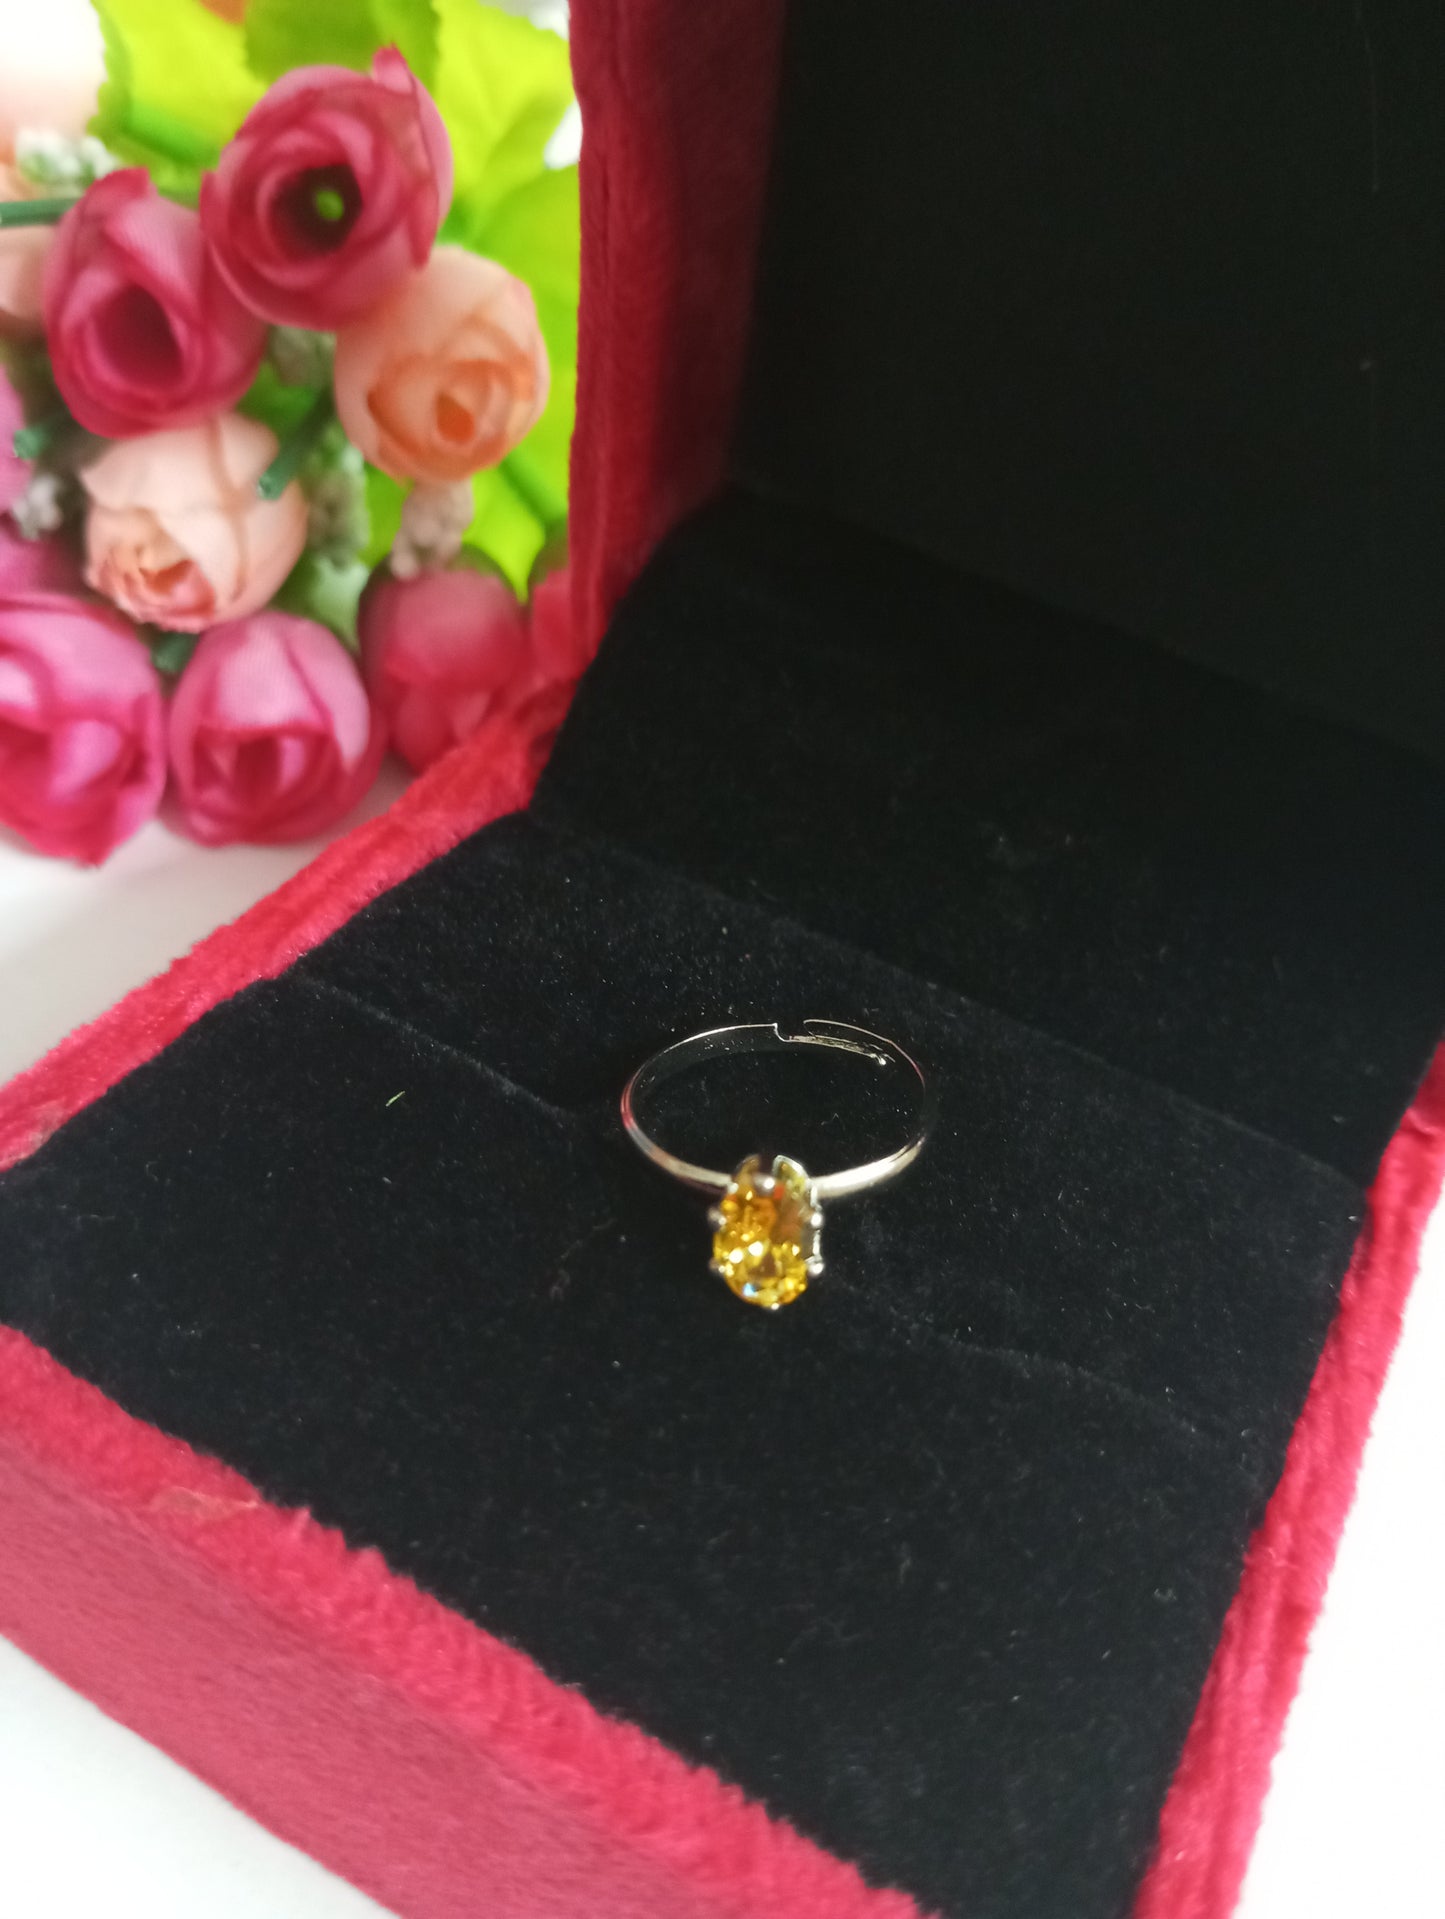 Oval Shape Stone Ring- Yellow and Silver Color